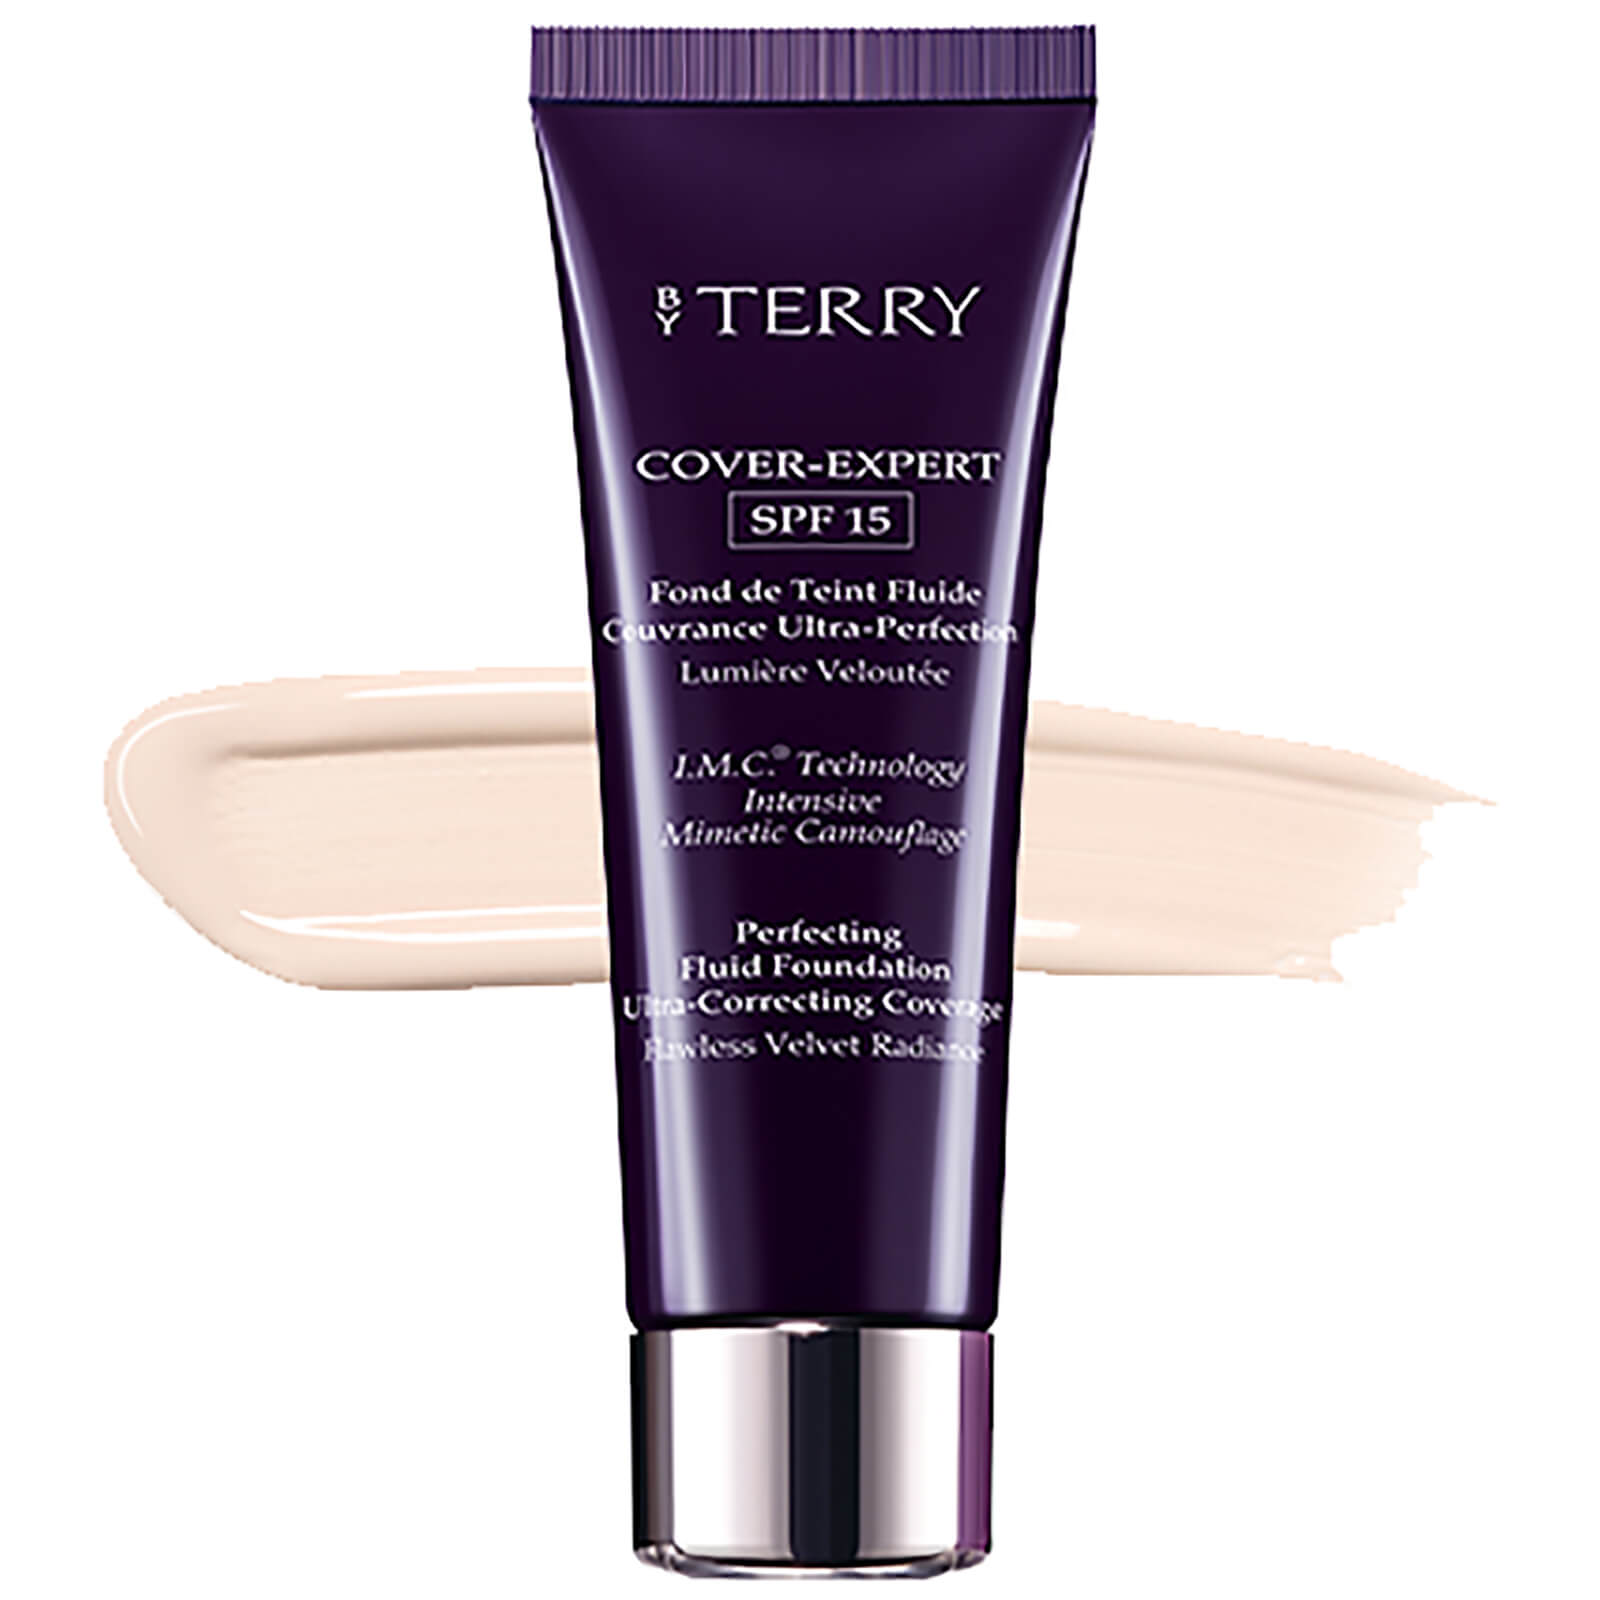 By Terry Cover-Expert Foundation SPF15 35ml (Various Shades) - 7 1. Fair Beige